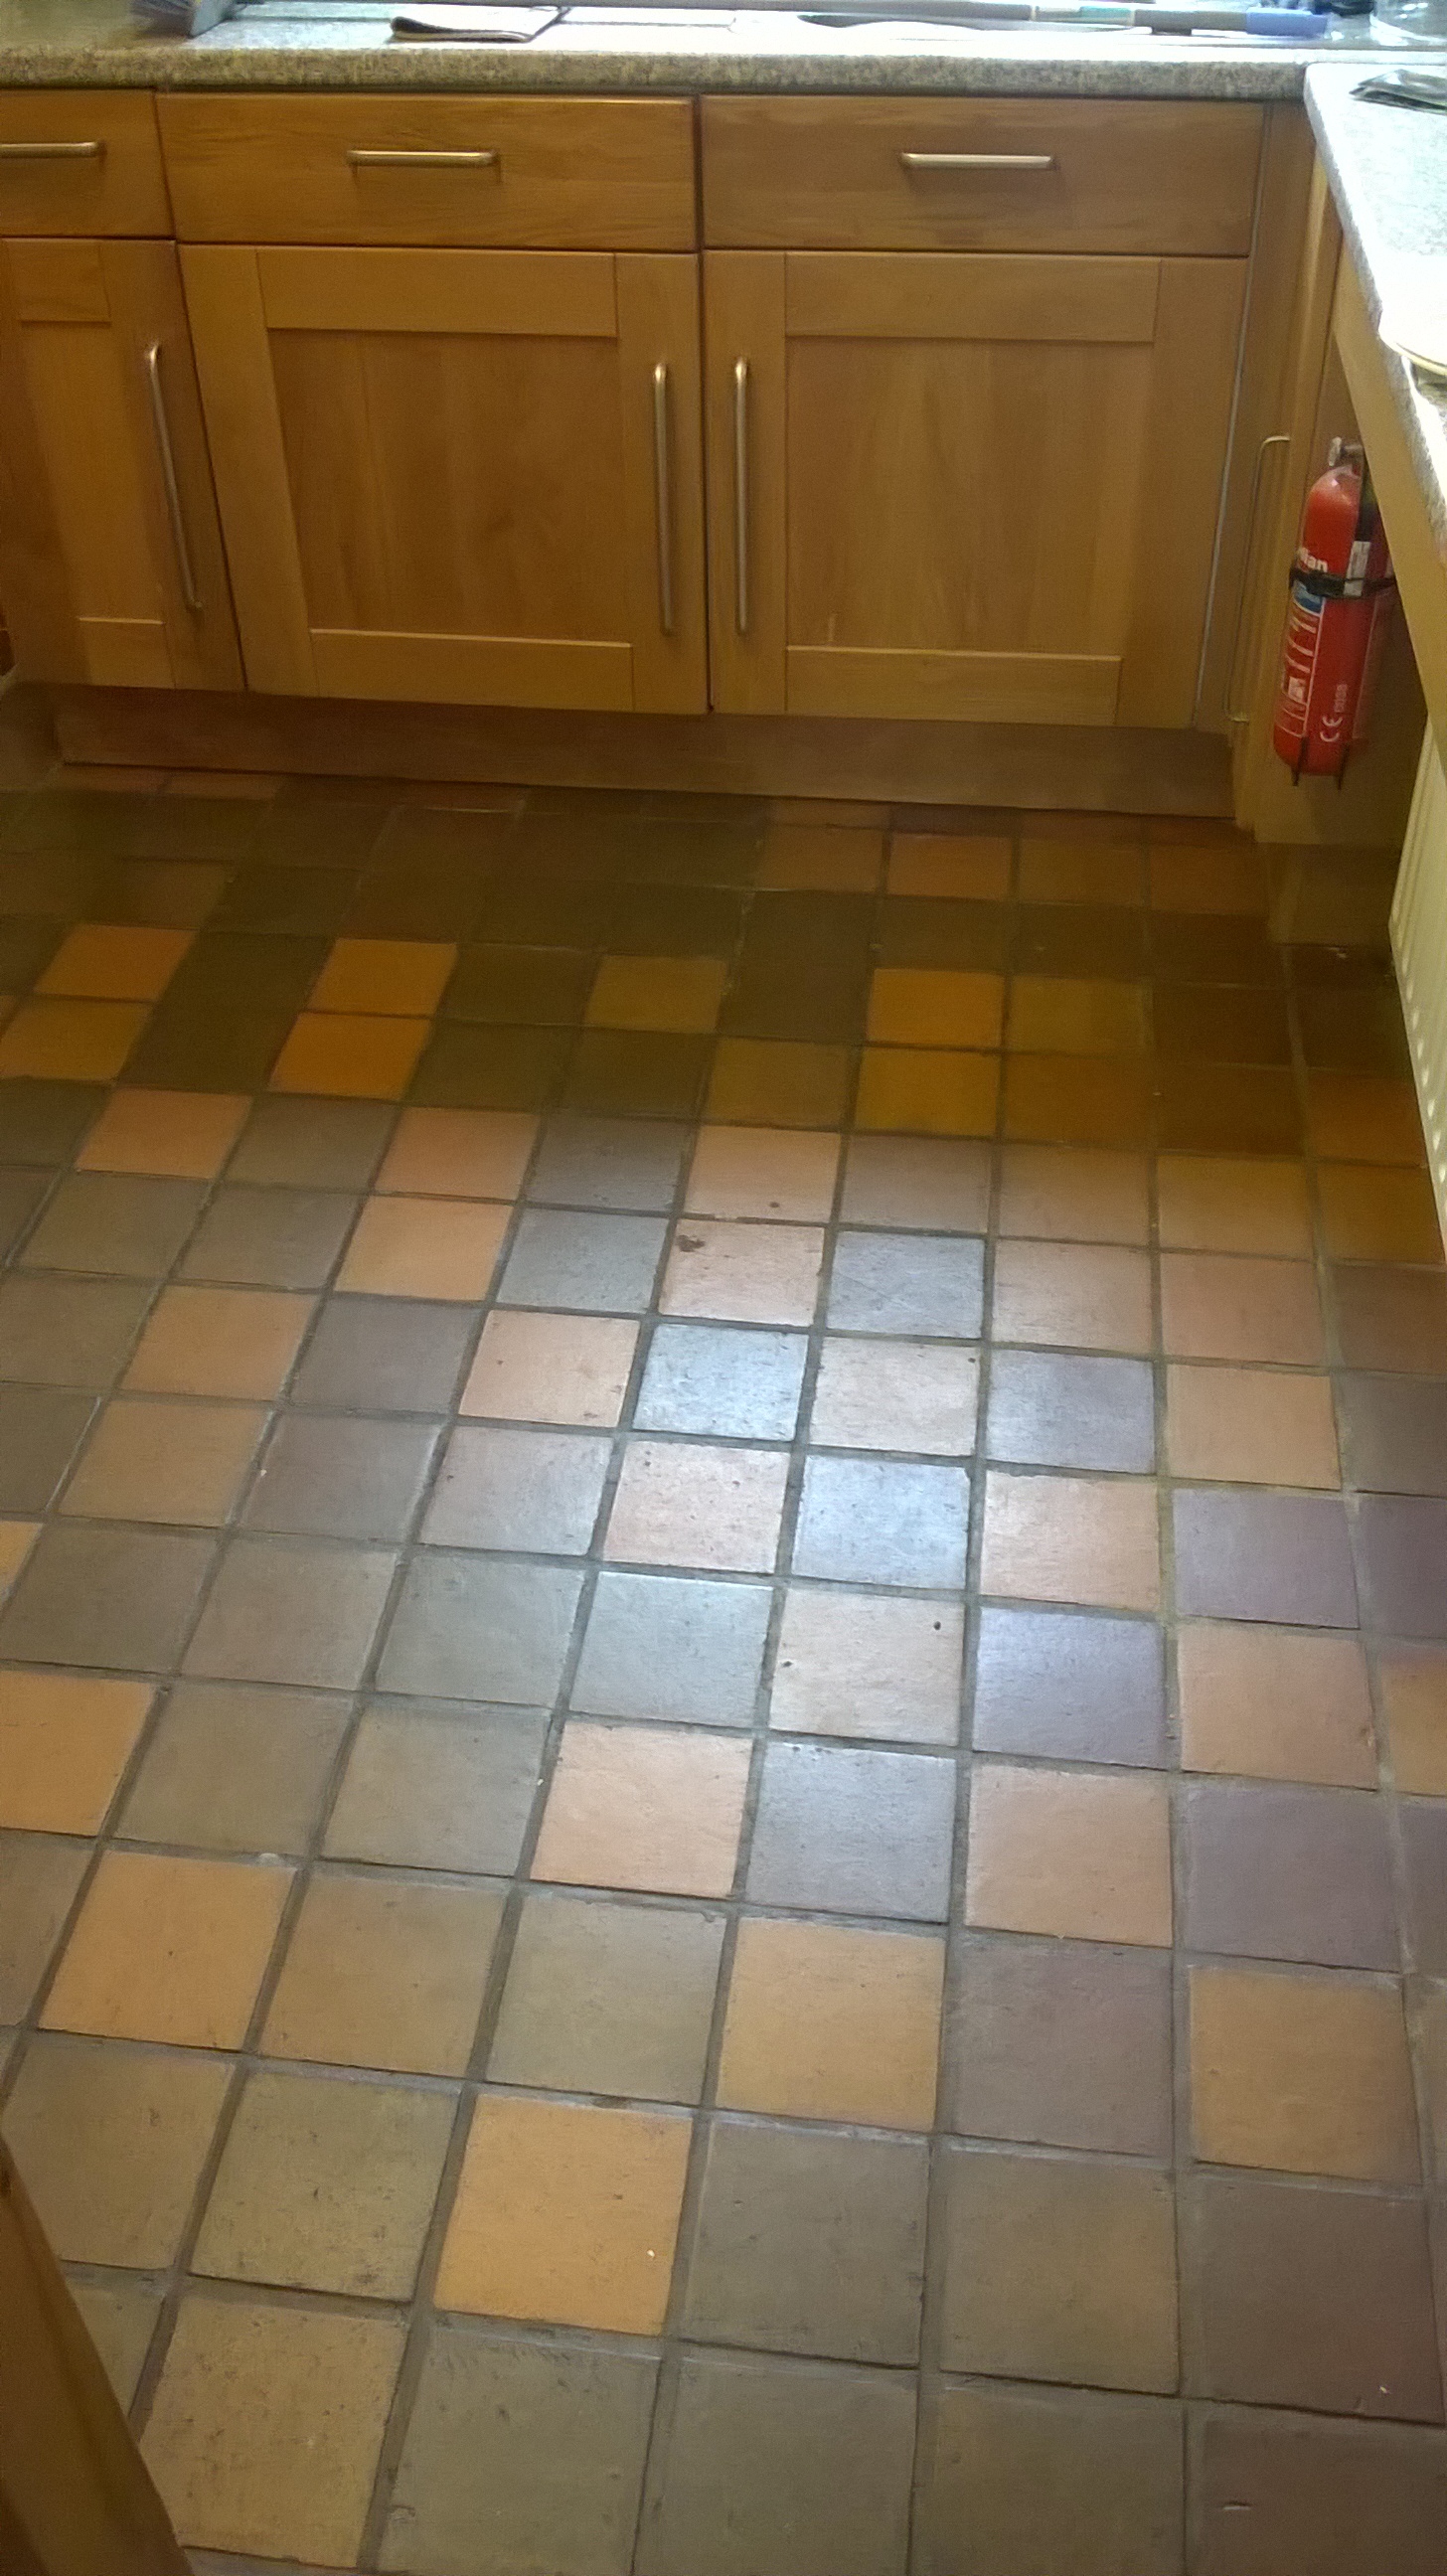 Quarry Tiled Kitchen Before Cleaning in Tutbury Burton on Trent